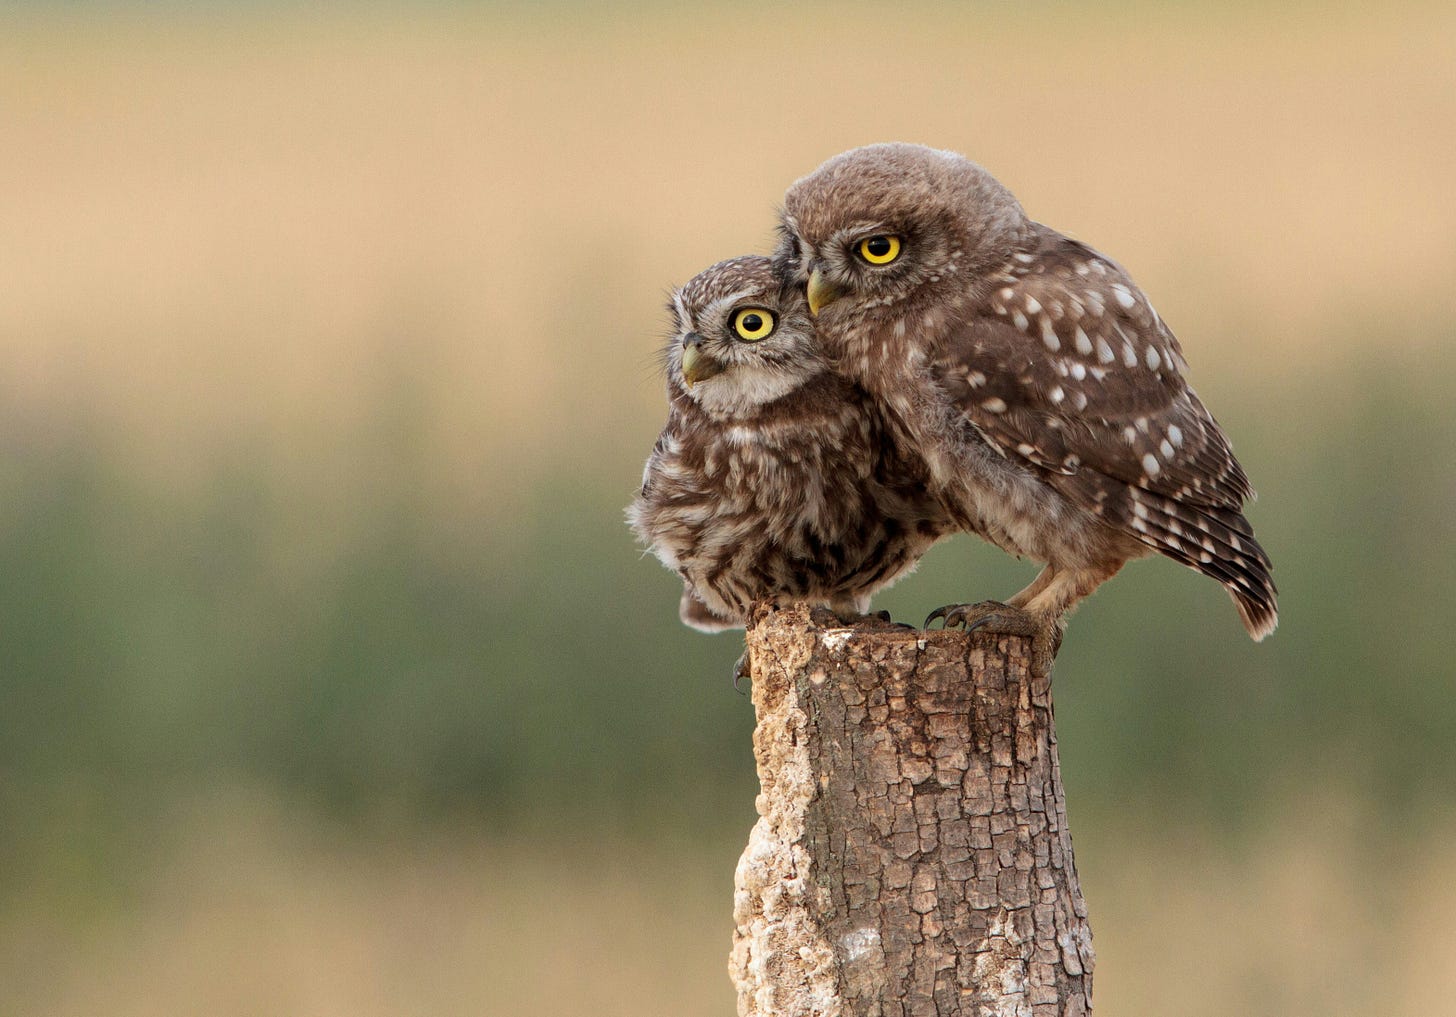 Two small brown owls with white spots on their wings huddle together on a fencepost watching something intently and probably thinking about murder